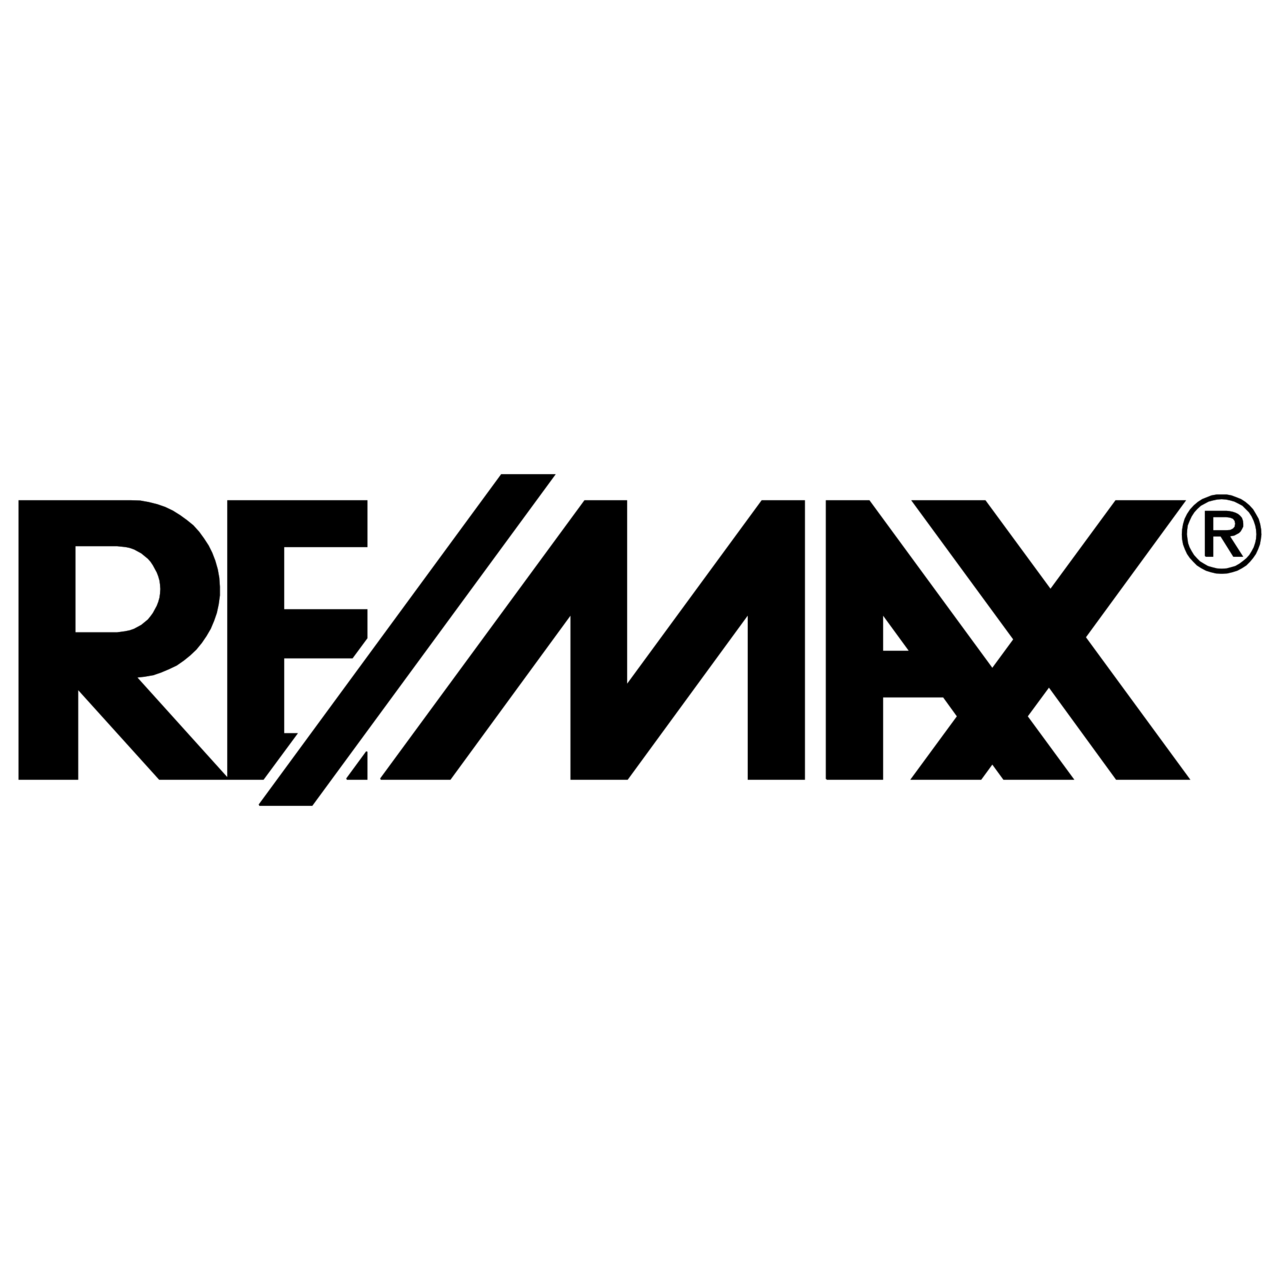 re-max-logo-black-and-white.png